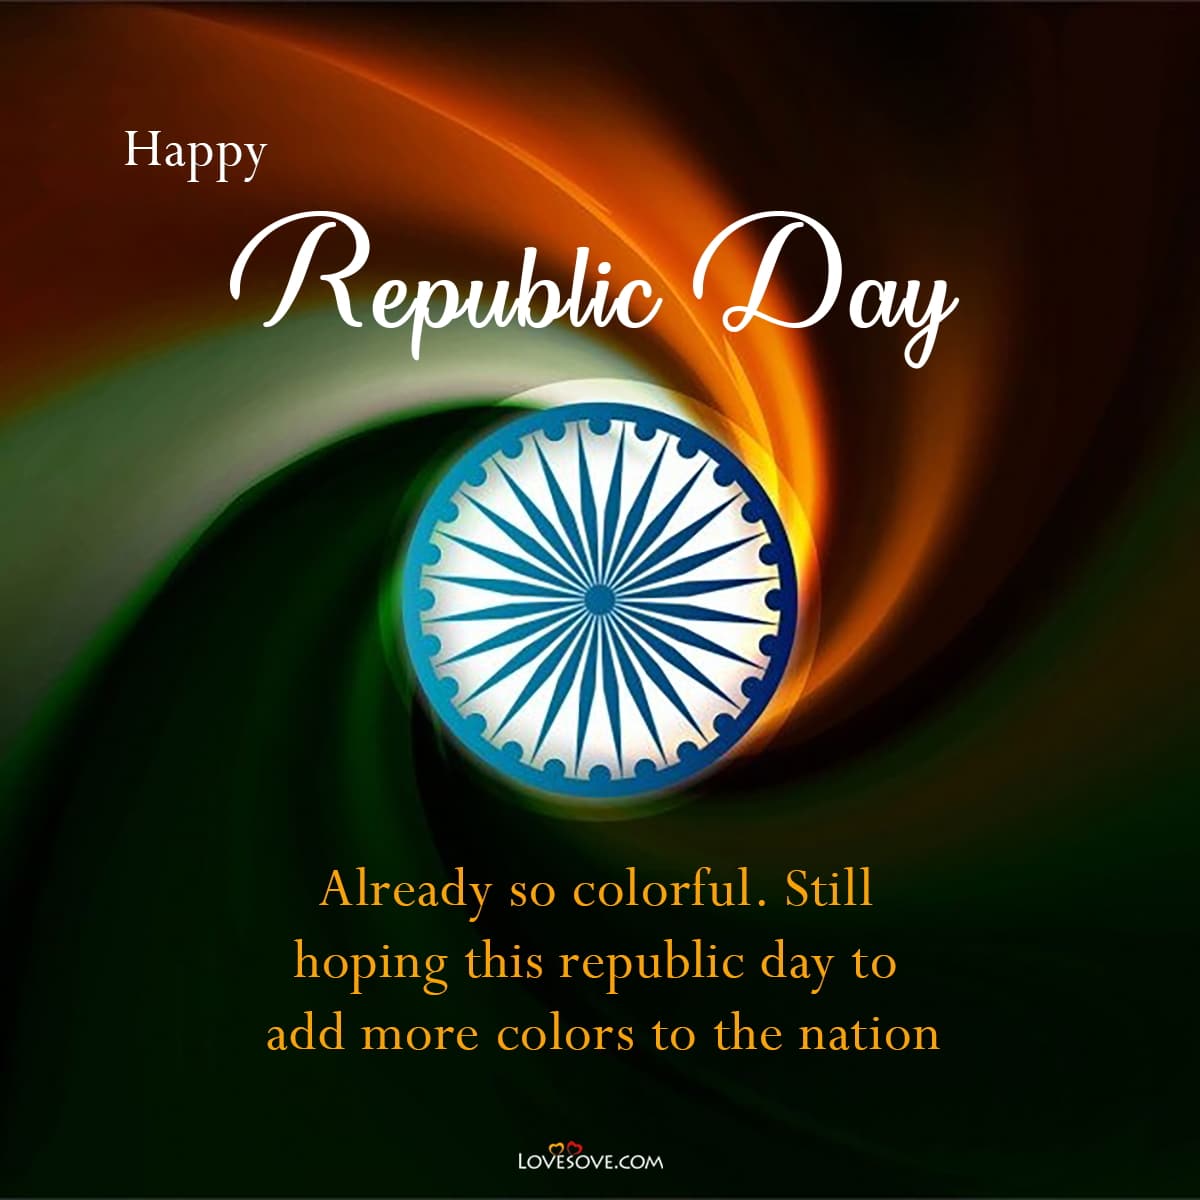 Inspirational Republic Day Quotes, Small Quotes On Republic Day, Heart Touching Republic Day Quotes